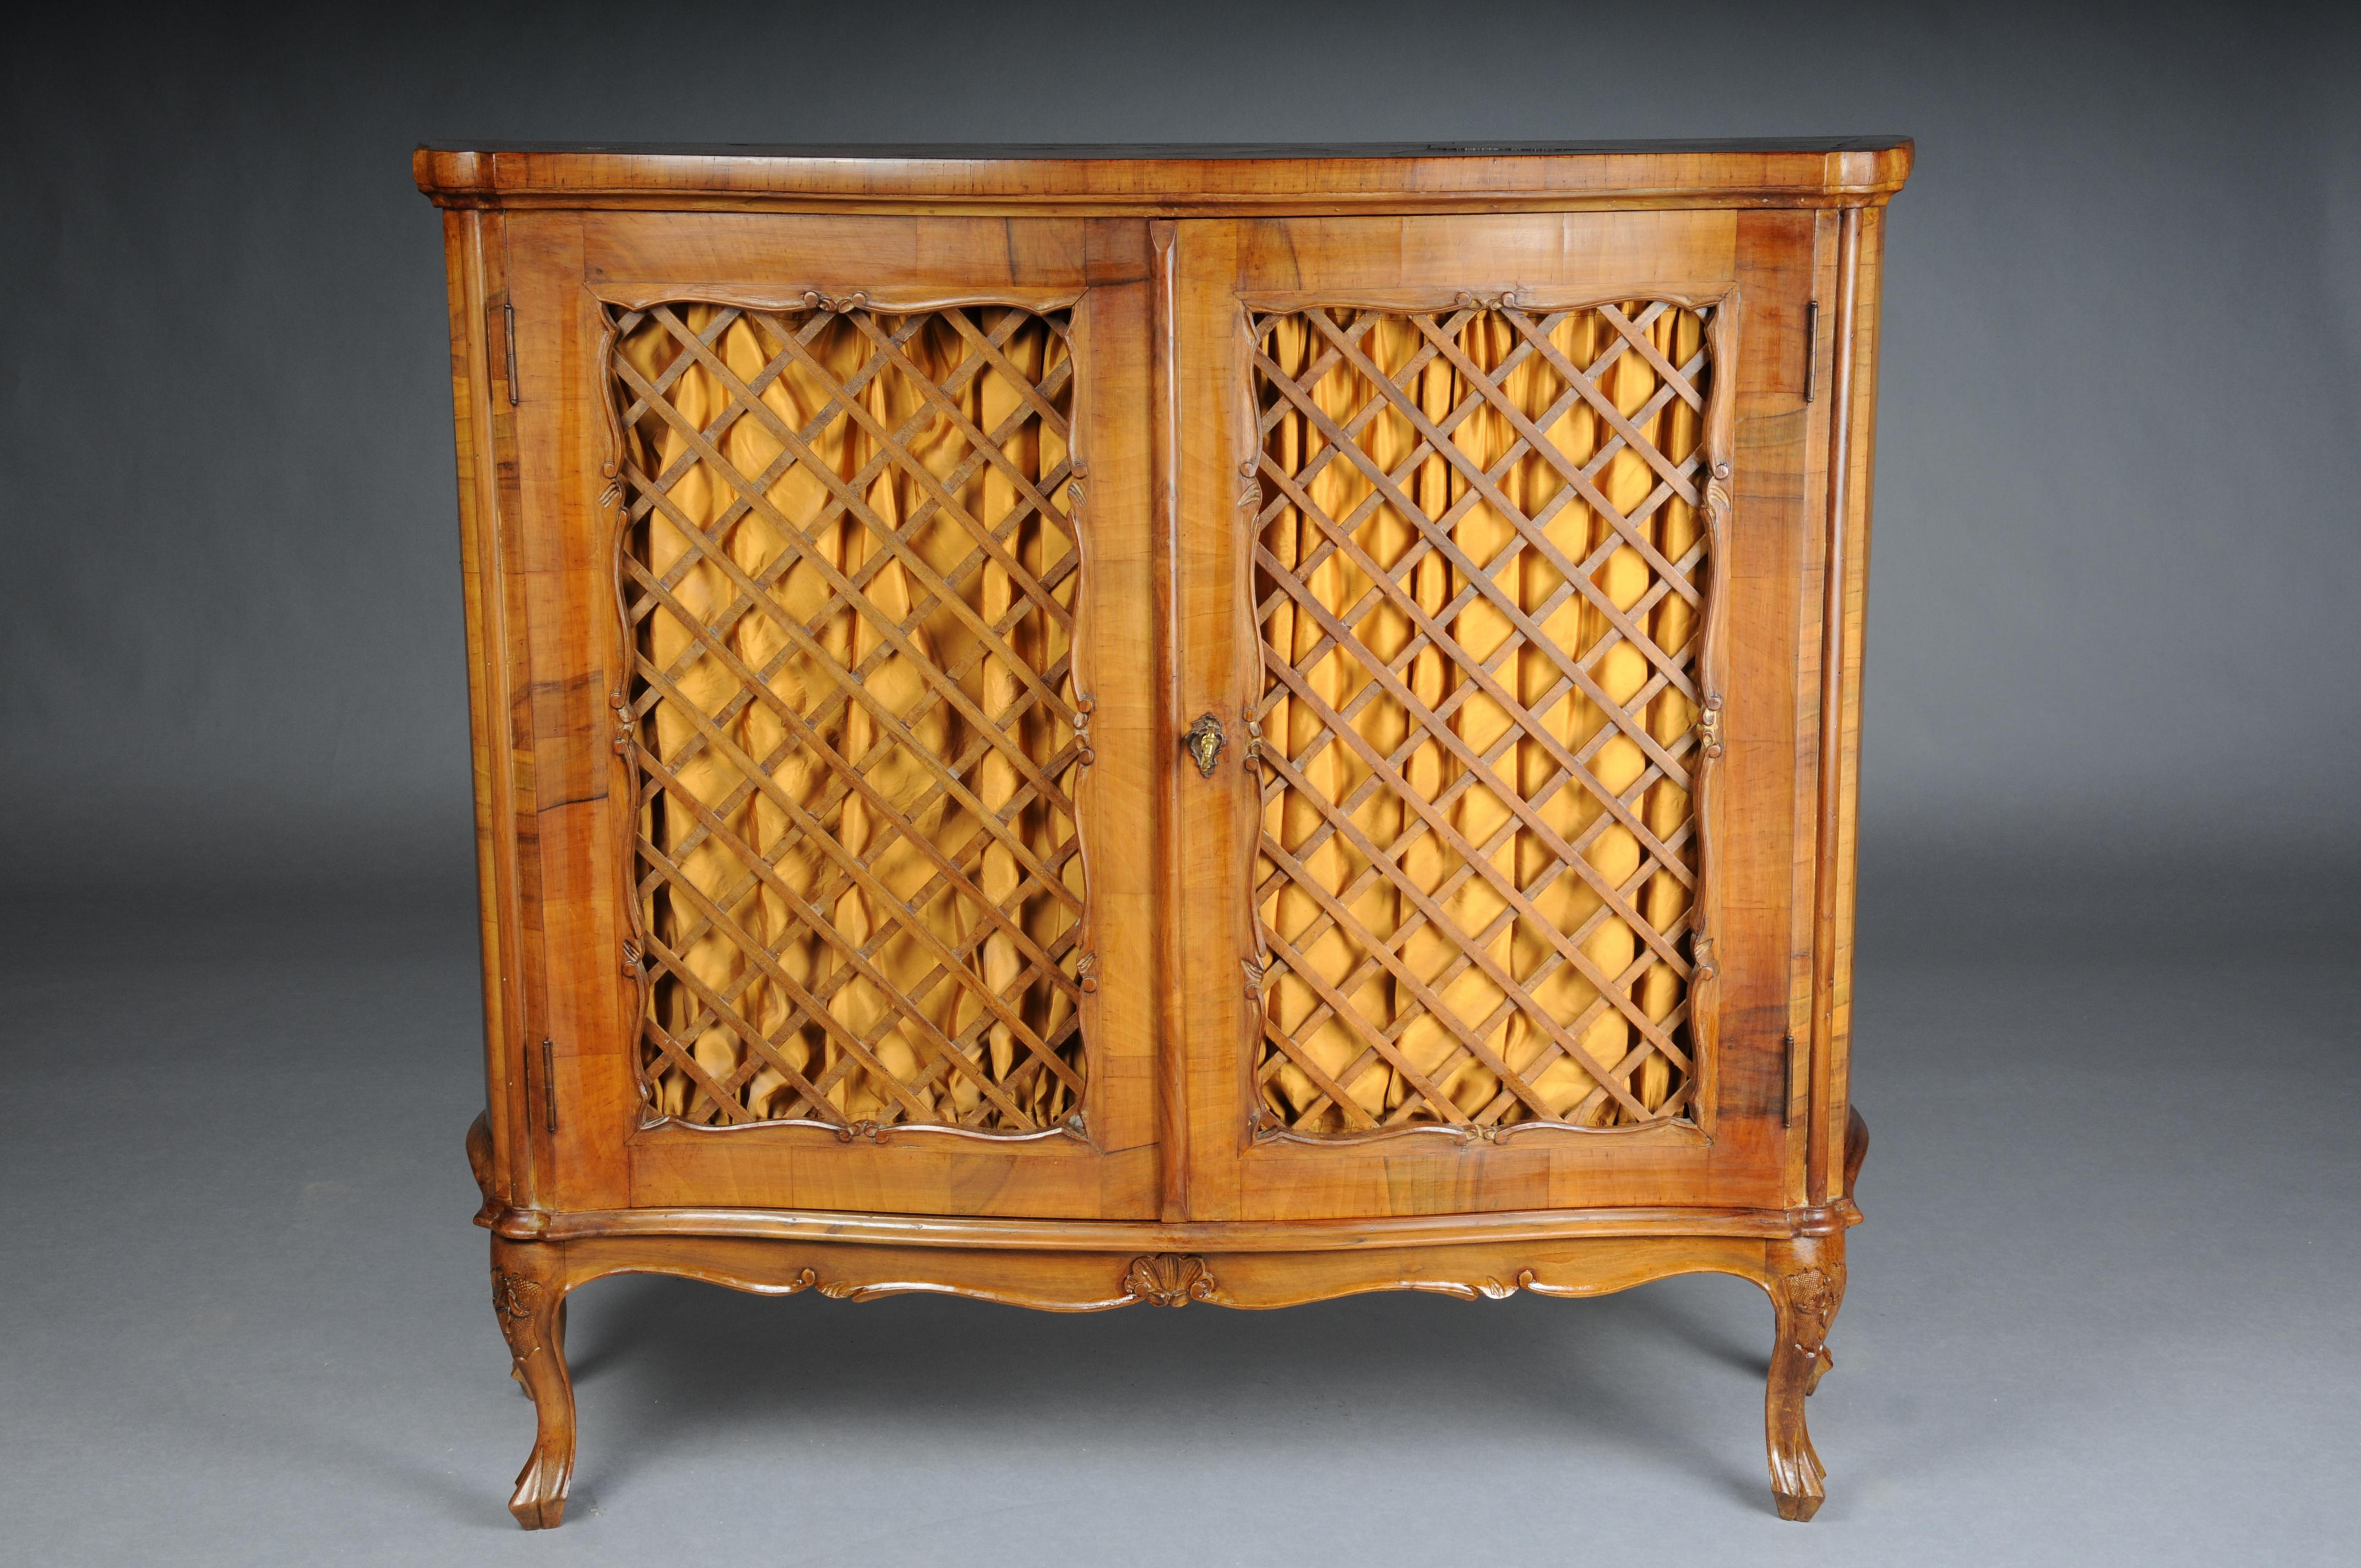 Beautiful antique wall cabinet/hall cabinet, 20th century. Walnut root veneer.
 
Solid wood with walnut root veneer and inlays. Hall cabinet made of solid wood, baroque. Multi-curved body standing on high curved legs. Two-door with lattice fence